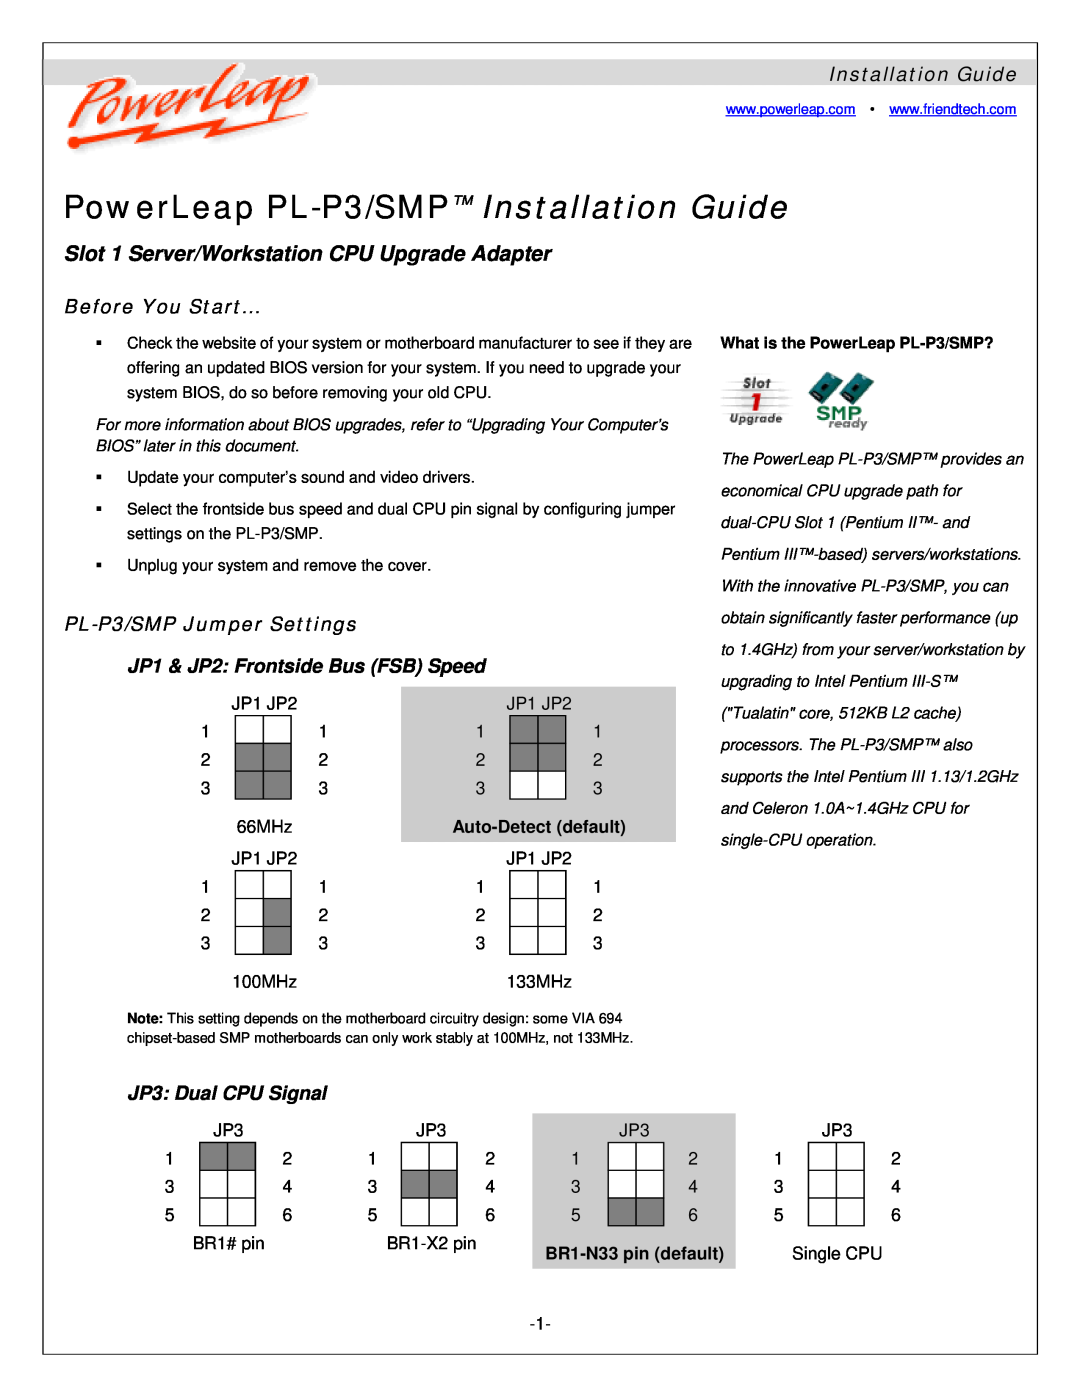 Compaq manual Installation Guide, Before You Start…, PL-P3/SMP Jumper Settings JP1 & JP2 Frontside Bus FSB Speed 